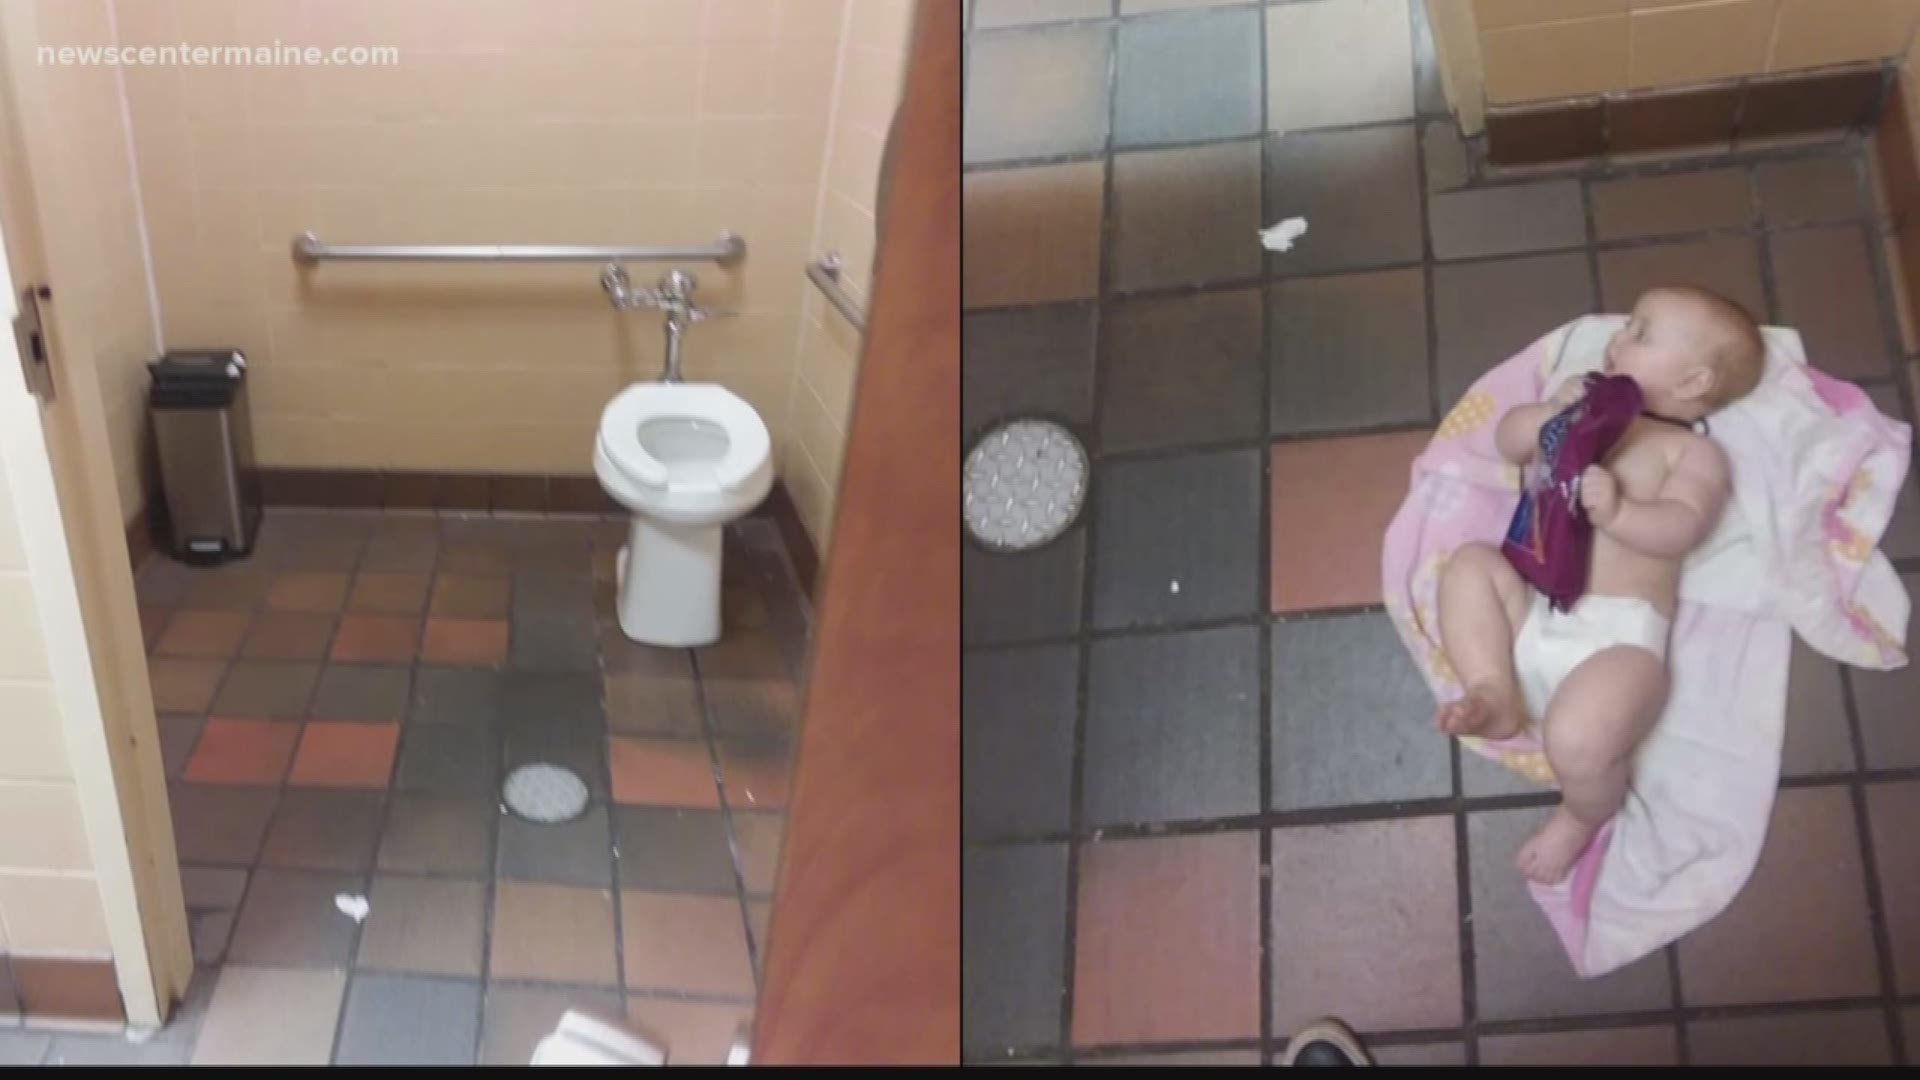 Portsmouth father Chris Mau, snapped photos after he had to change daughter's diapers on restaurant floor.